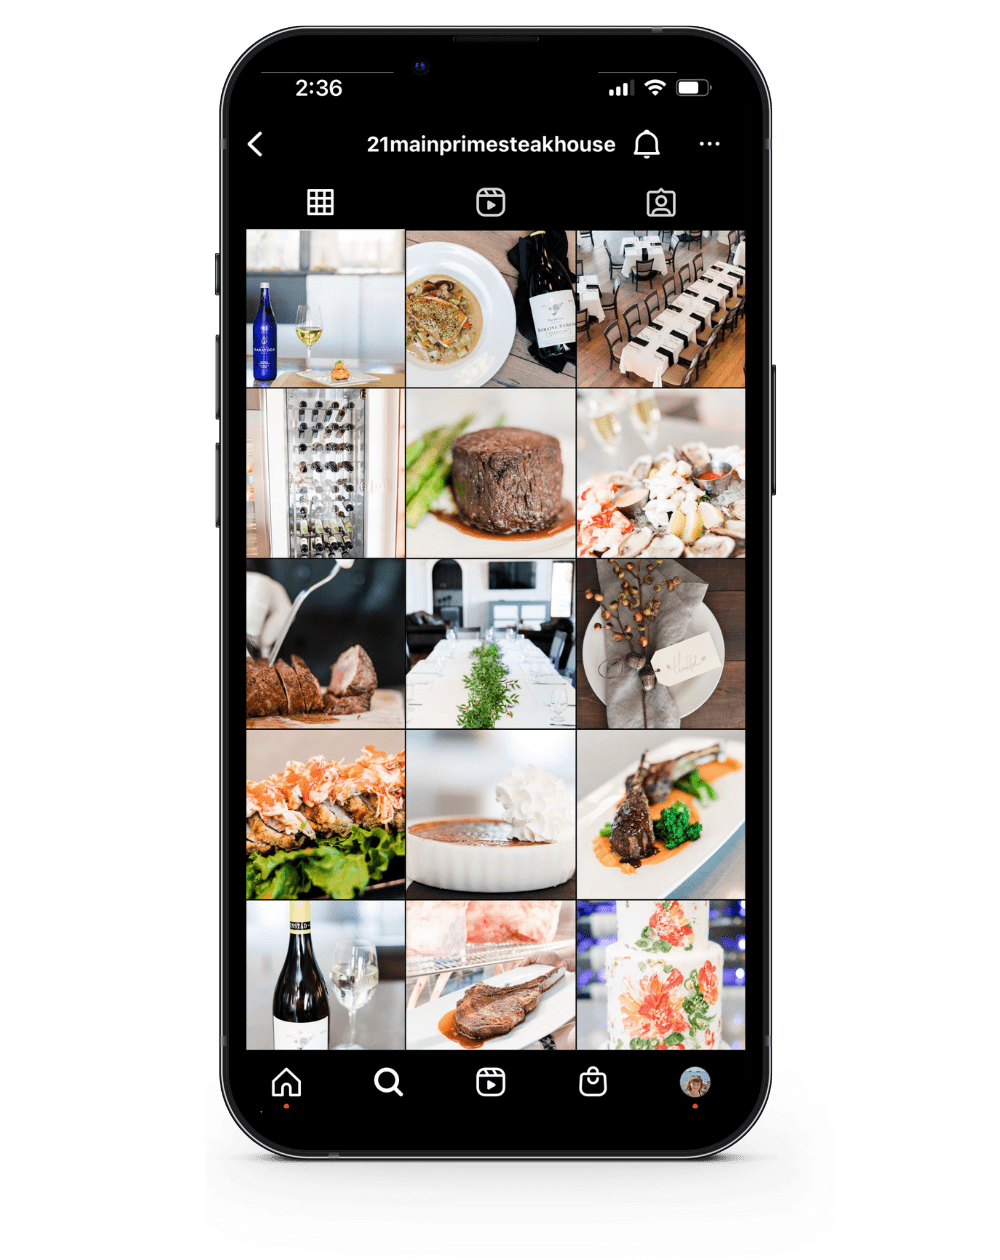 Example of a restaurant Instagram grid
